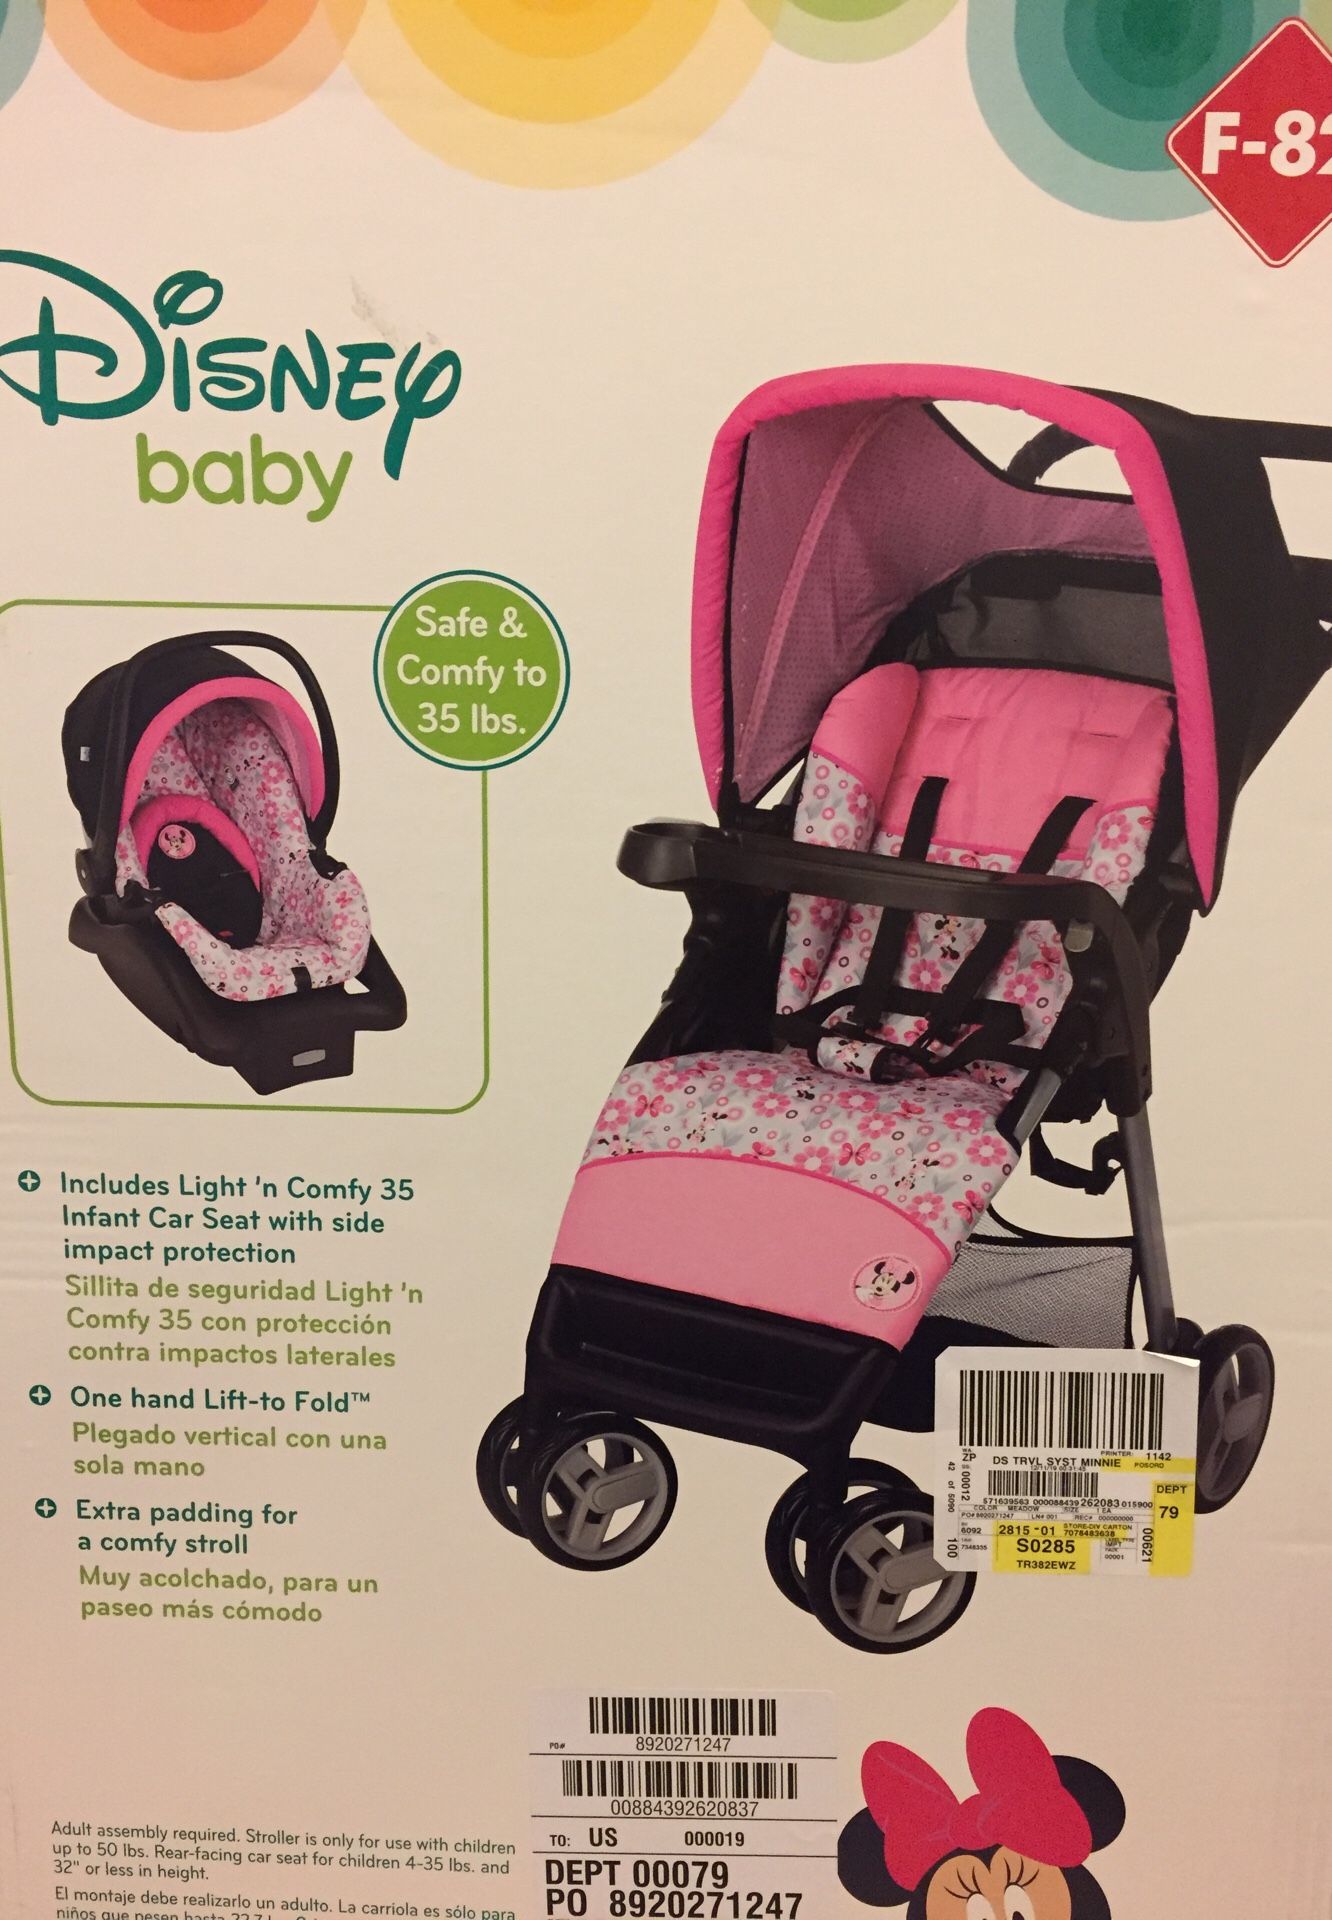 Disney baby Minnie Mouse travel system